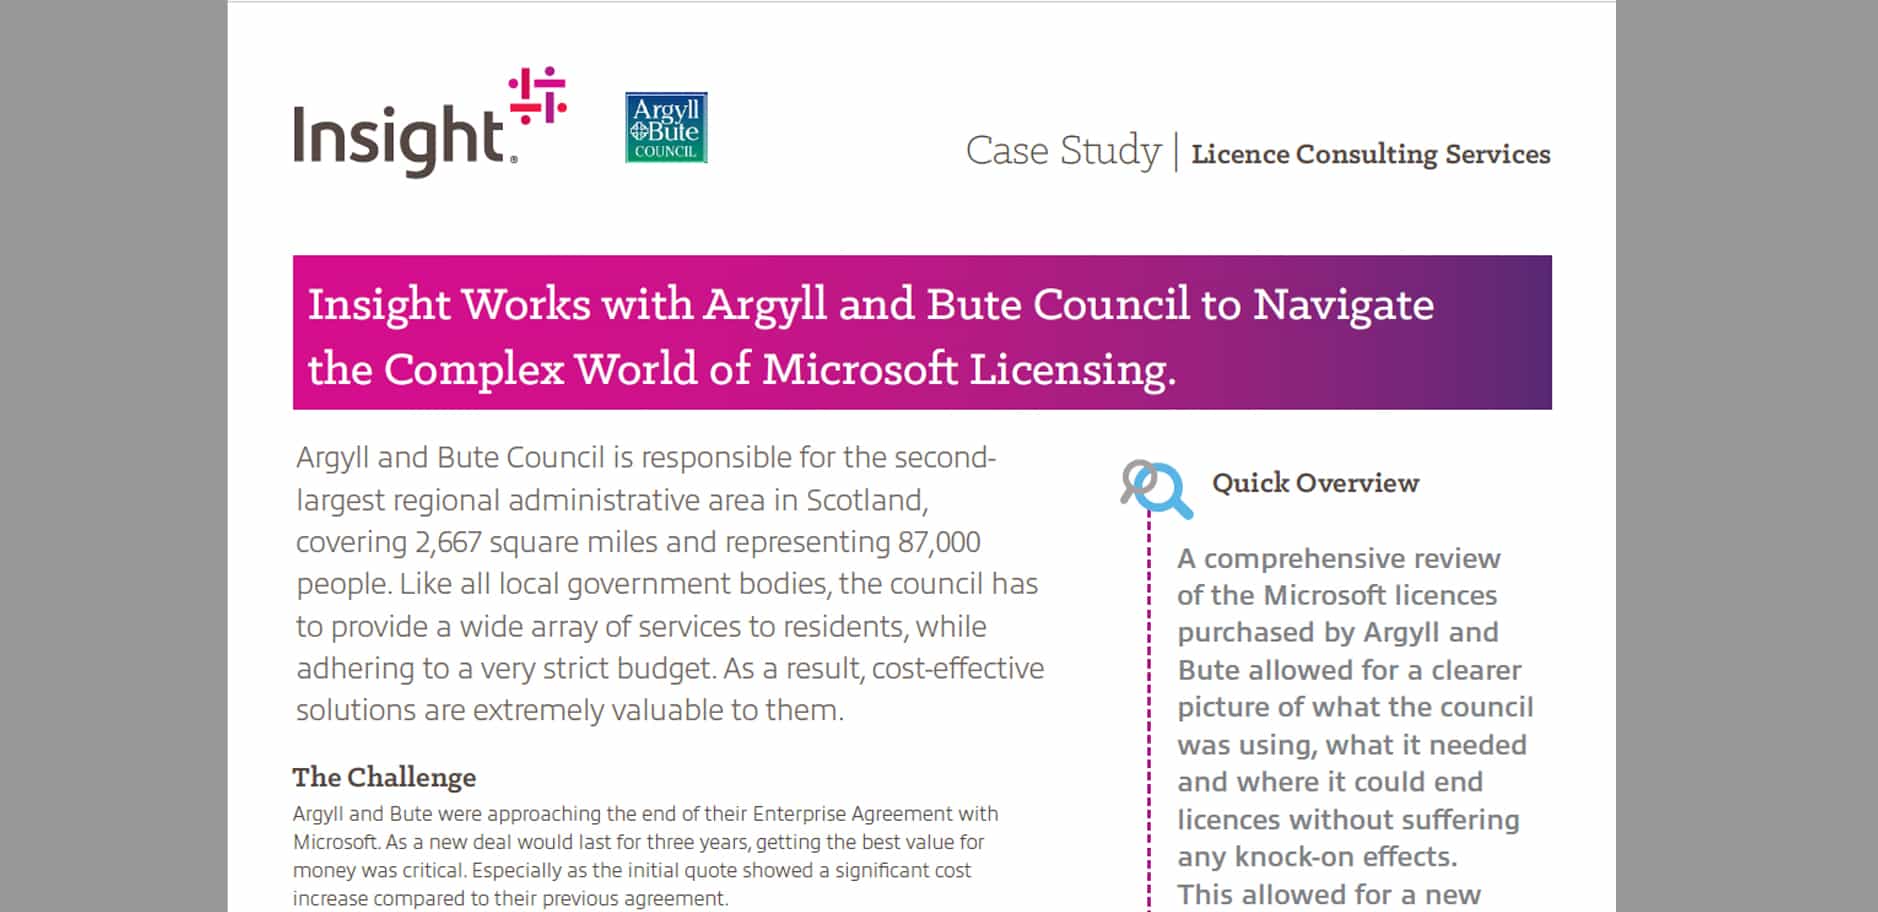 Download the Argyll and Bute Council case study